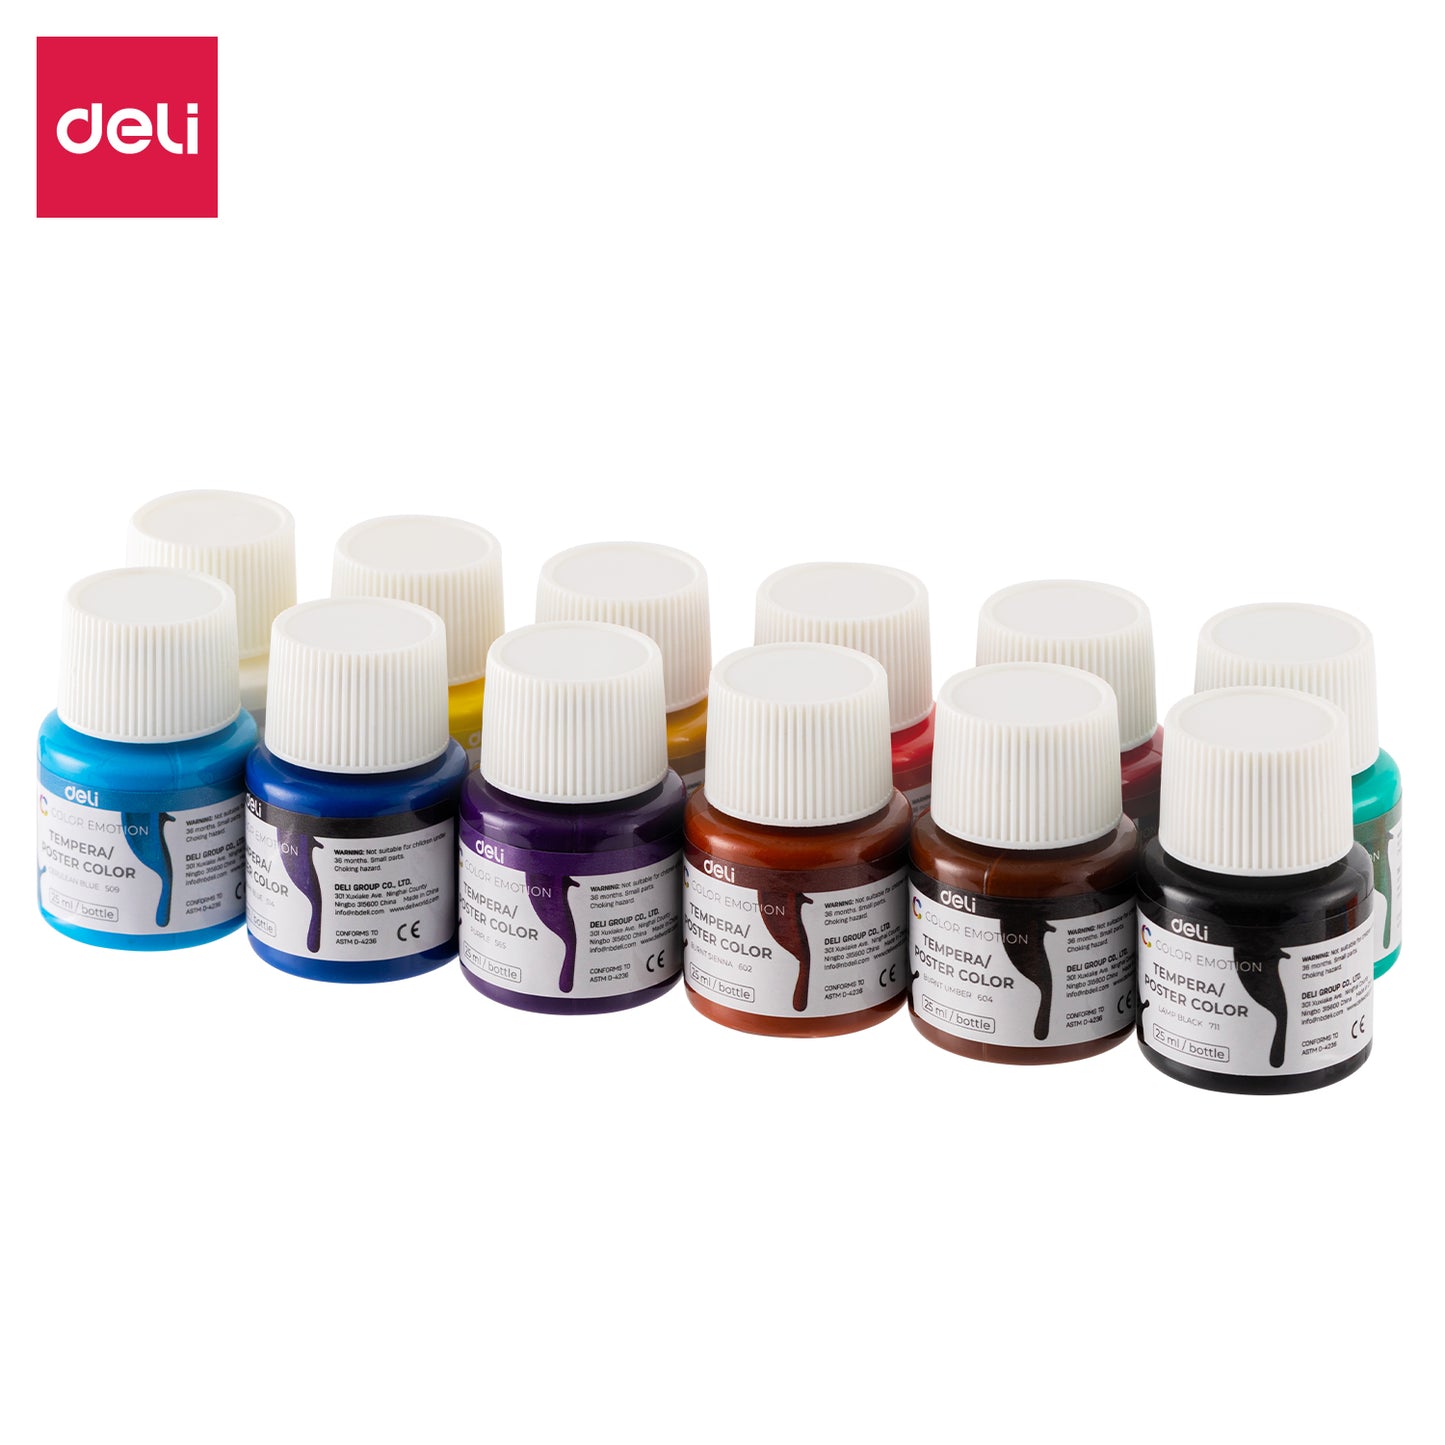 DELI WC14-12 GOUACHE 25ML 12 COLORS - Color May Vary